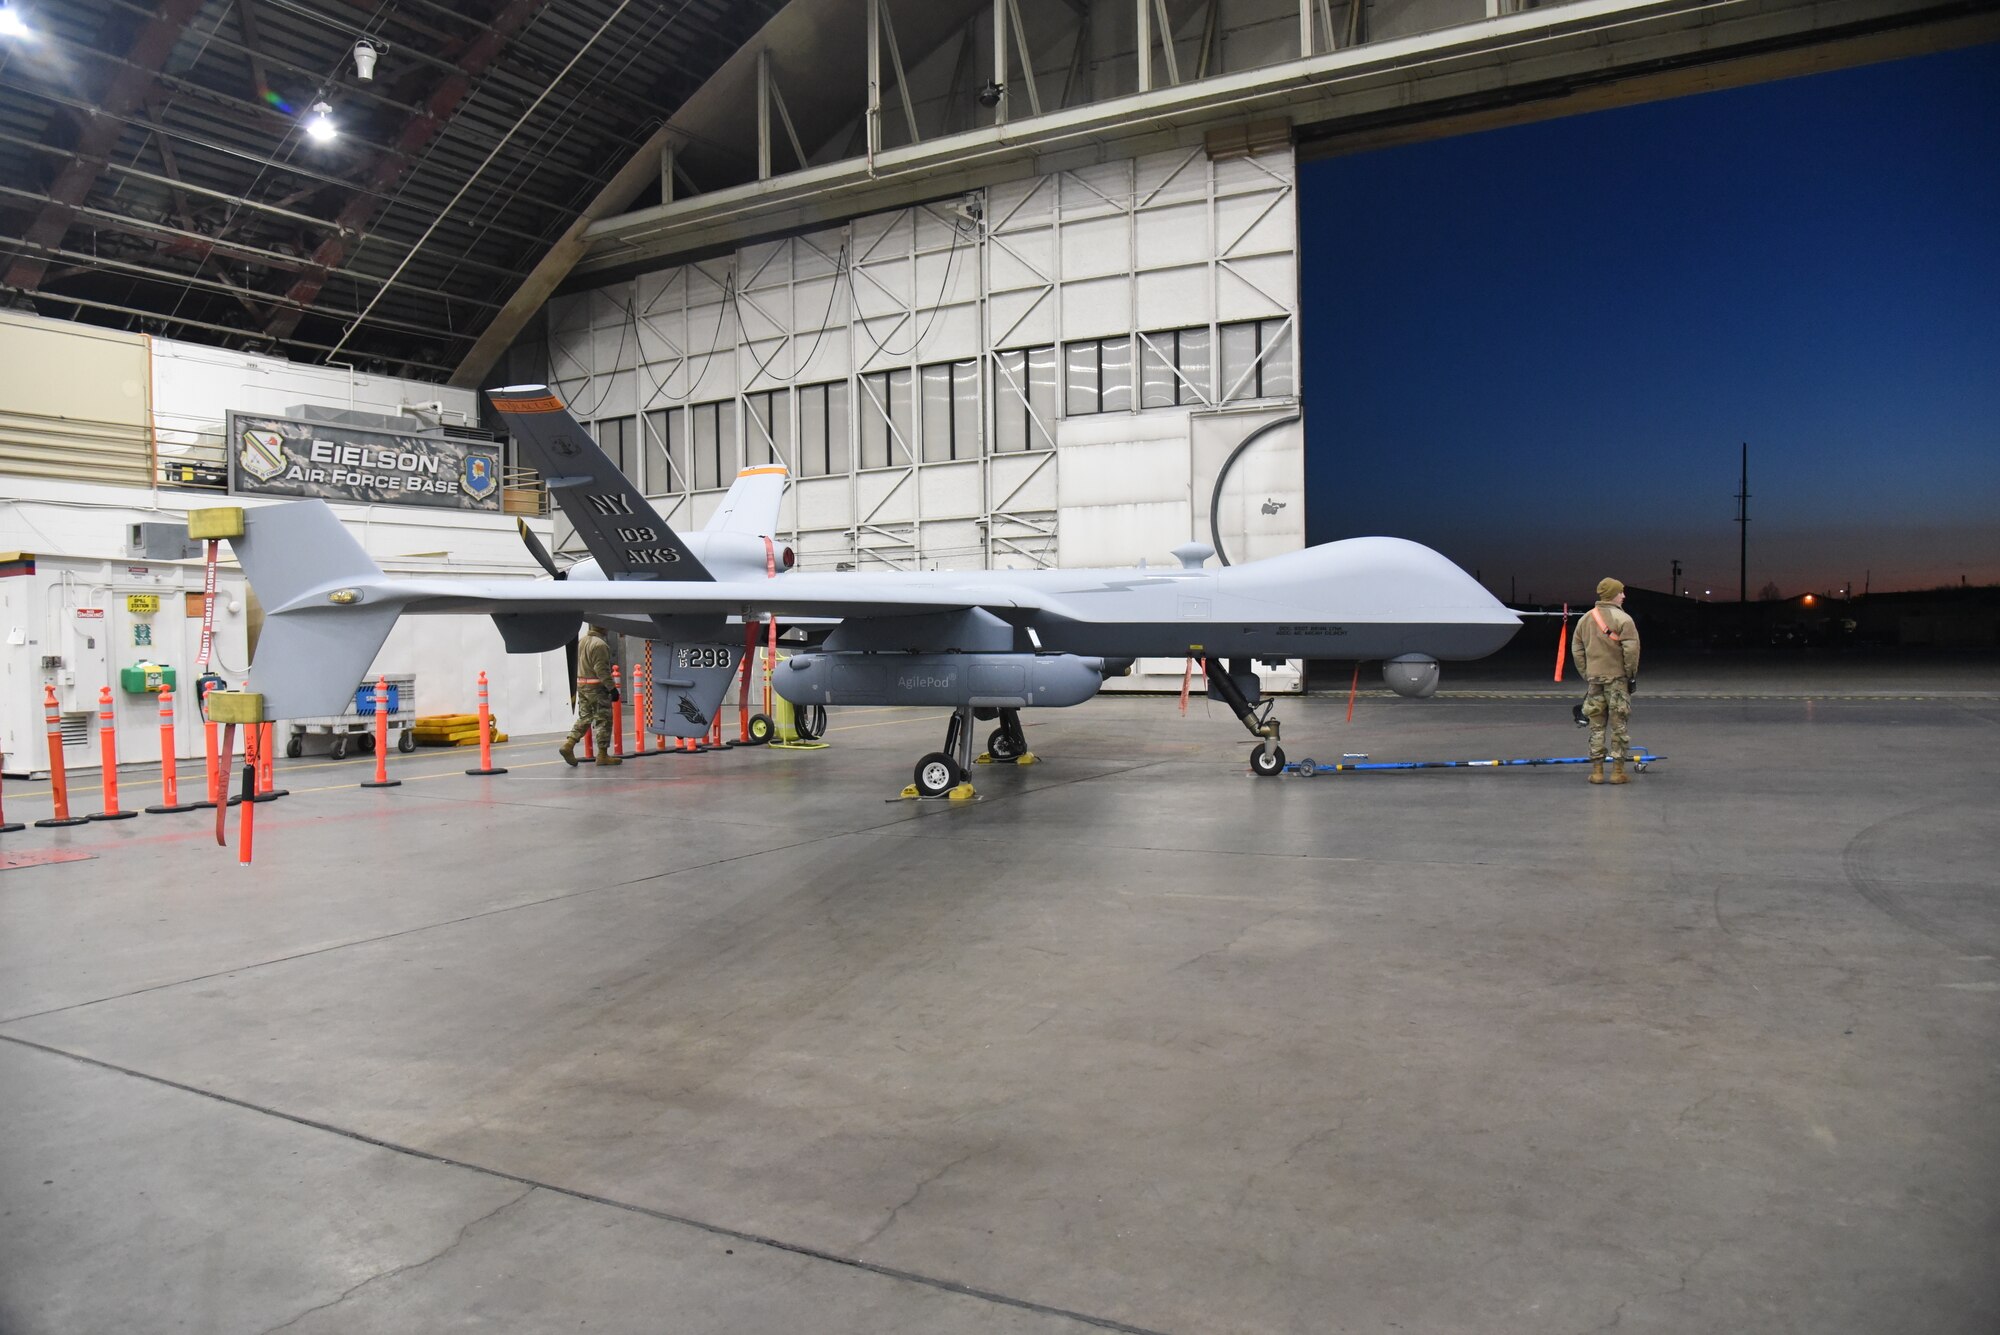 A 174th Attack Wing MQ-9 Reaper prepares for flight at Eielson Air Force Base during exercise Northern Edge 21. The 174th has partnered with multiple DoD contractors and academia to lead the effort in establishing new and additional capabilities for the MQ-9 Reaper. This two-week long exercise that took place from May 3-15. Northern Edge is Alaska’s premier joint-training exercise designed to practice operations and enhance interoperability among the services. (U.S. Air National Guard photo by Airman 1st Class Tiffany Scofield )